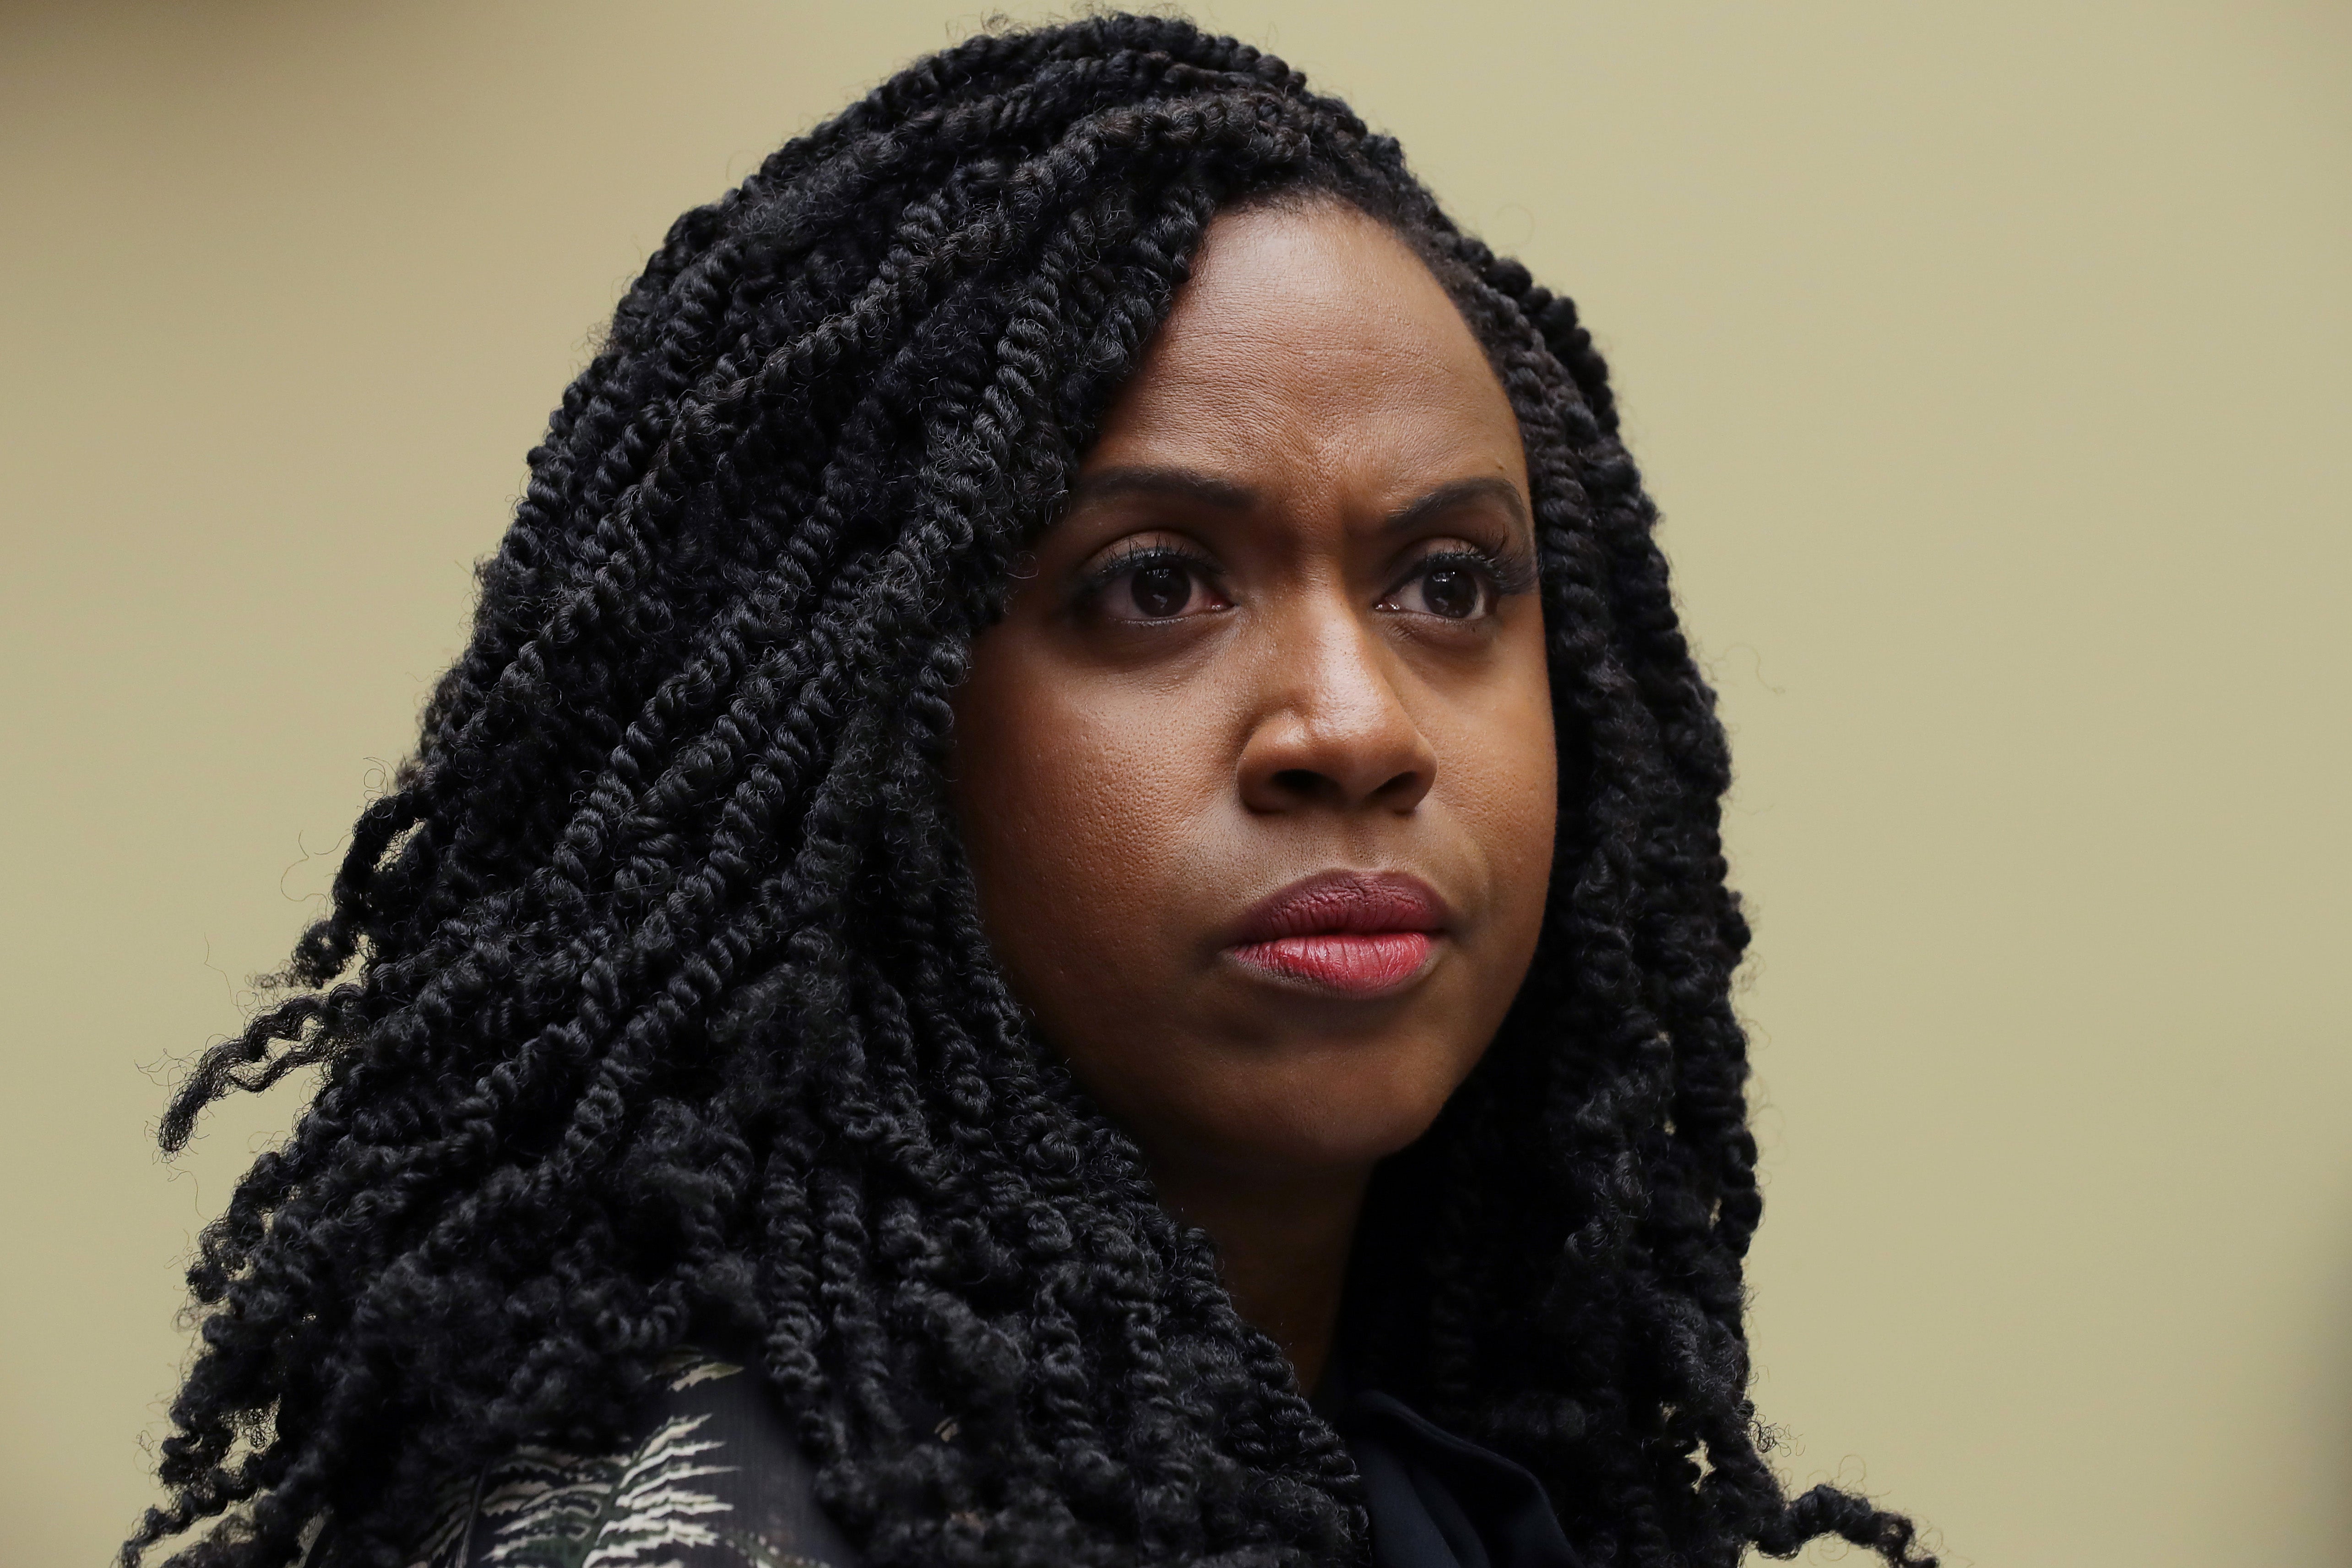 Rep. Ayanna Pressley Talks Gun Control, Immigration On ‘Daily Show’